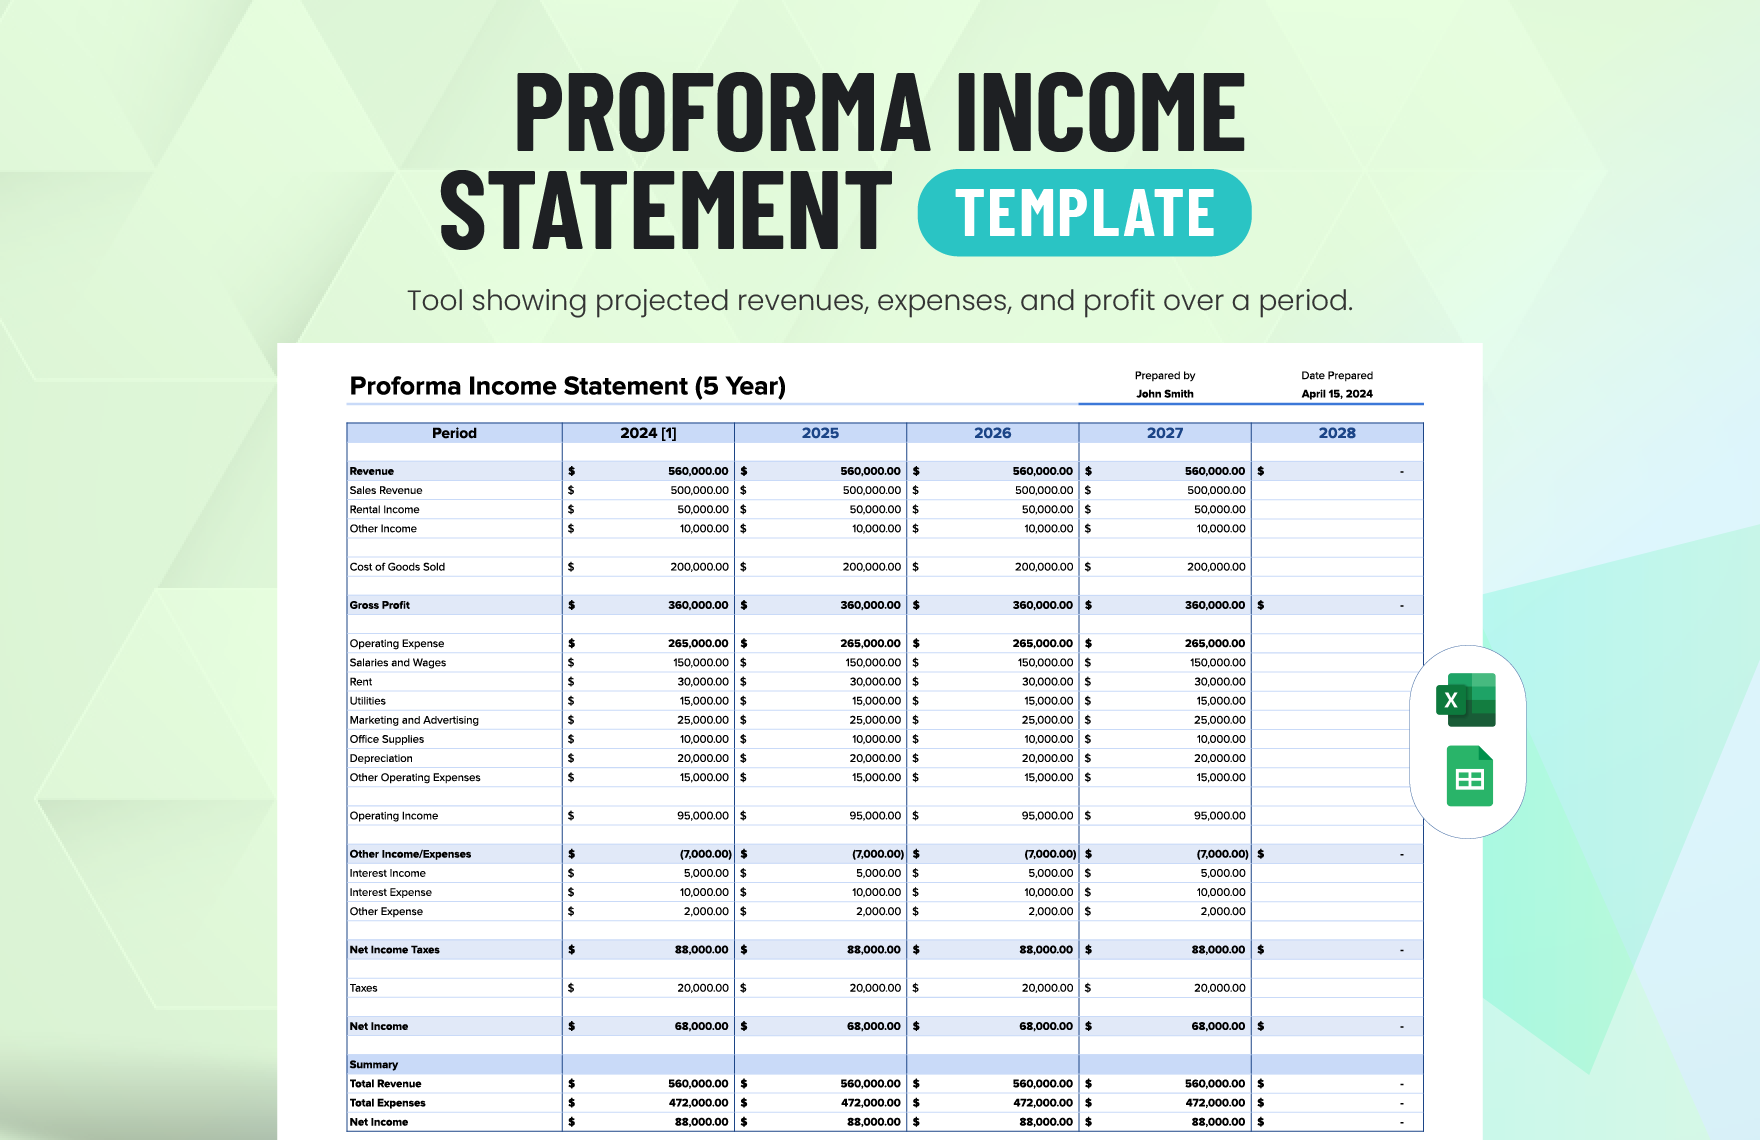 Proforma Income Statement Template in Excel, Google Sheets